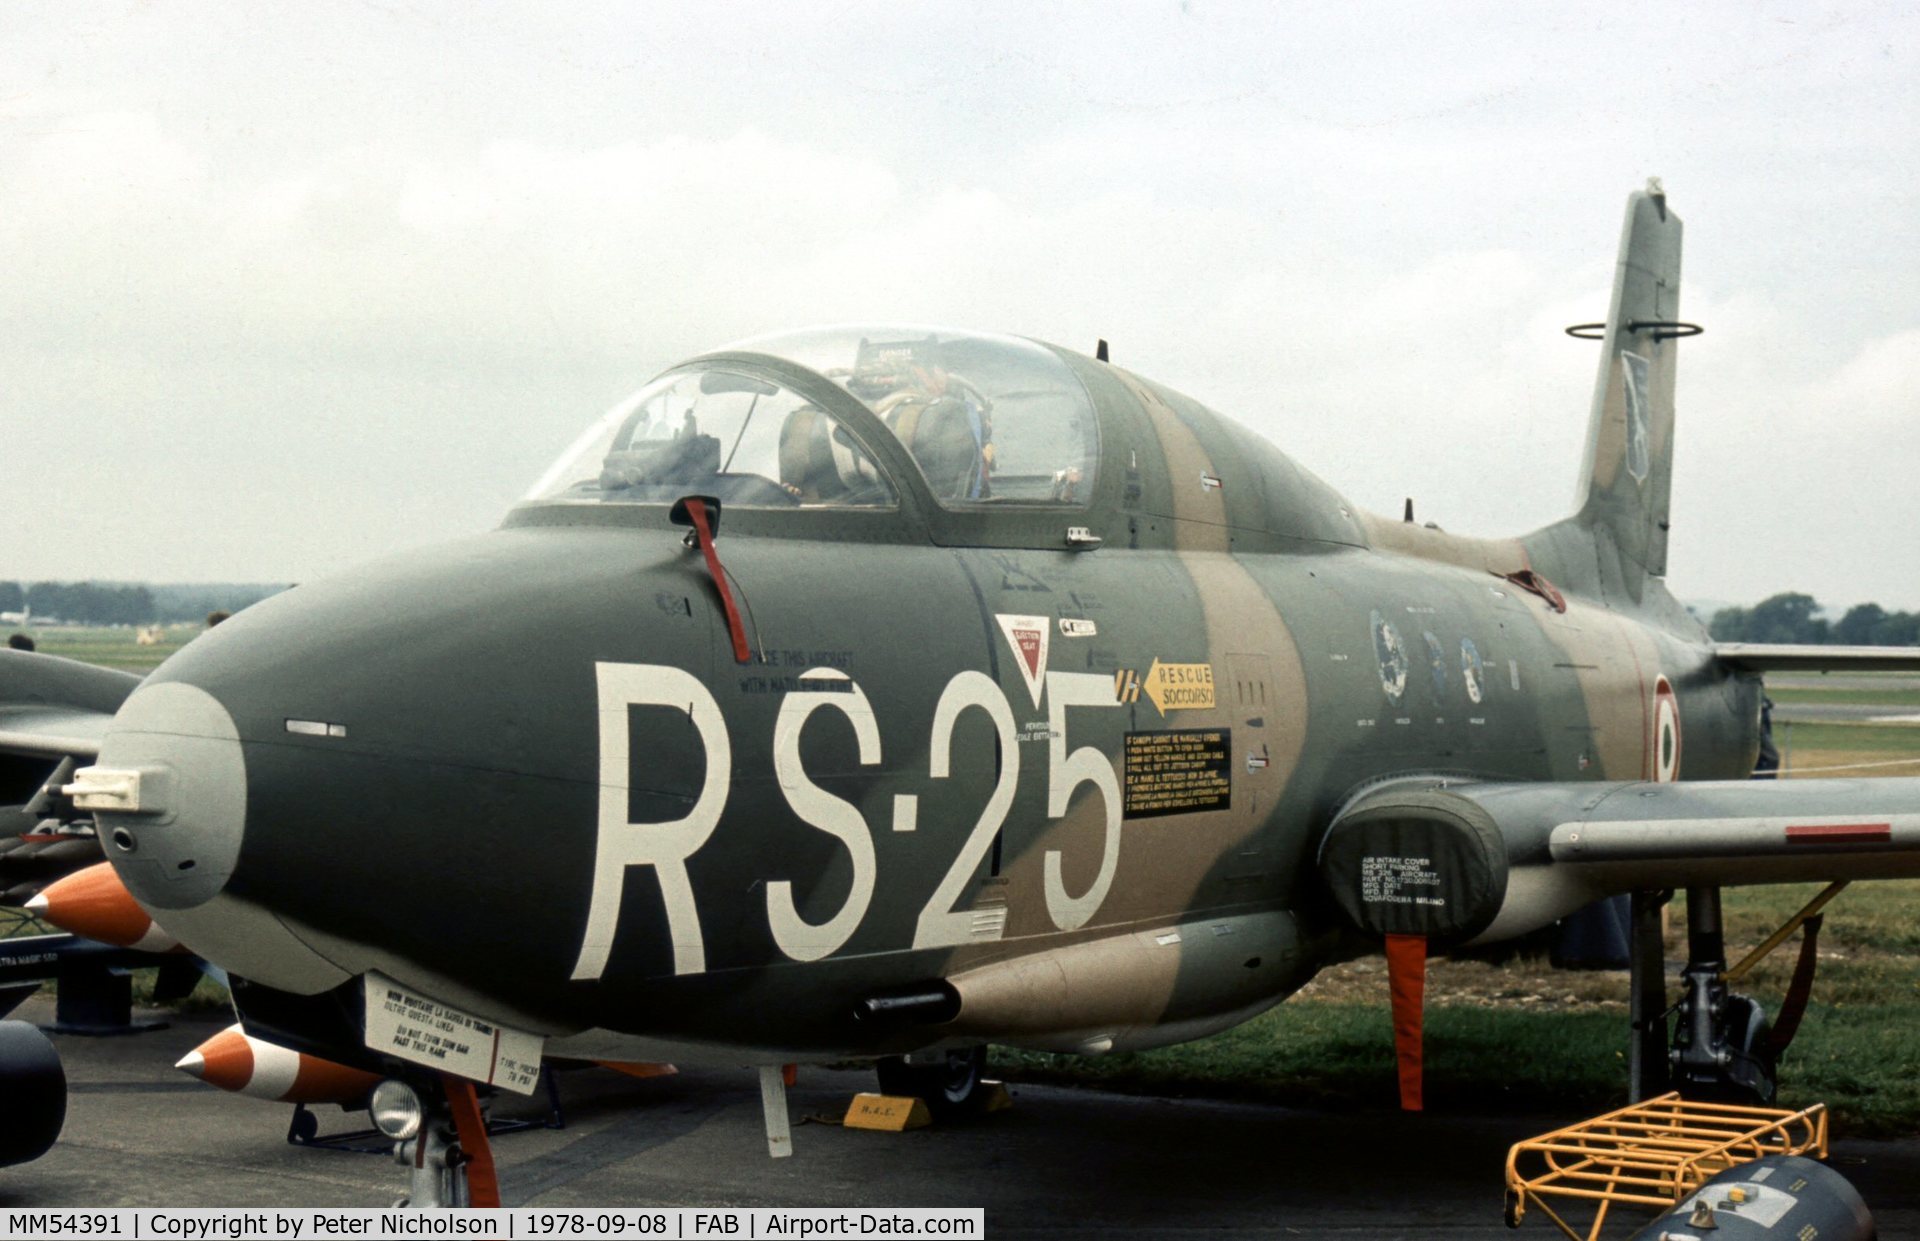 MM54391, Aermacchi MB-326K C/N 6478/219, Second prototype MB.326K on display at the 1978 Farnborough Airshow.